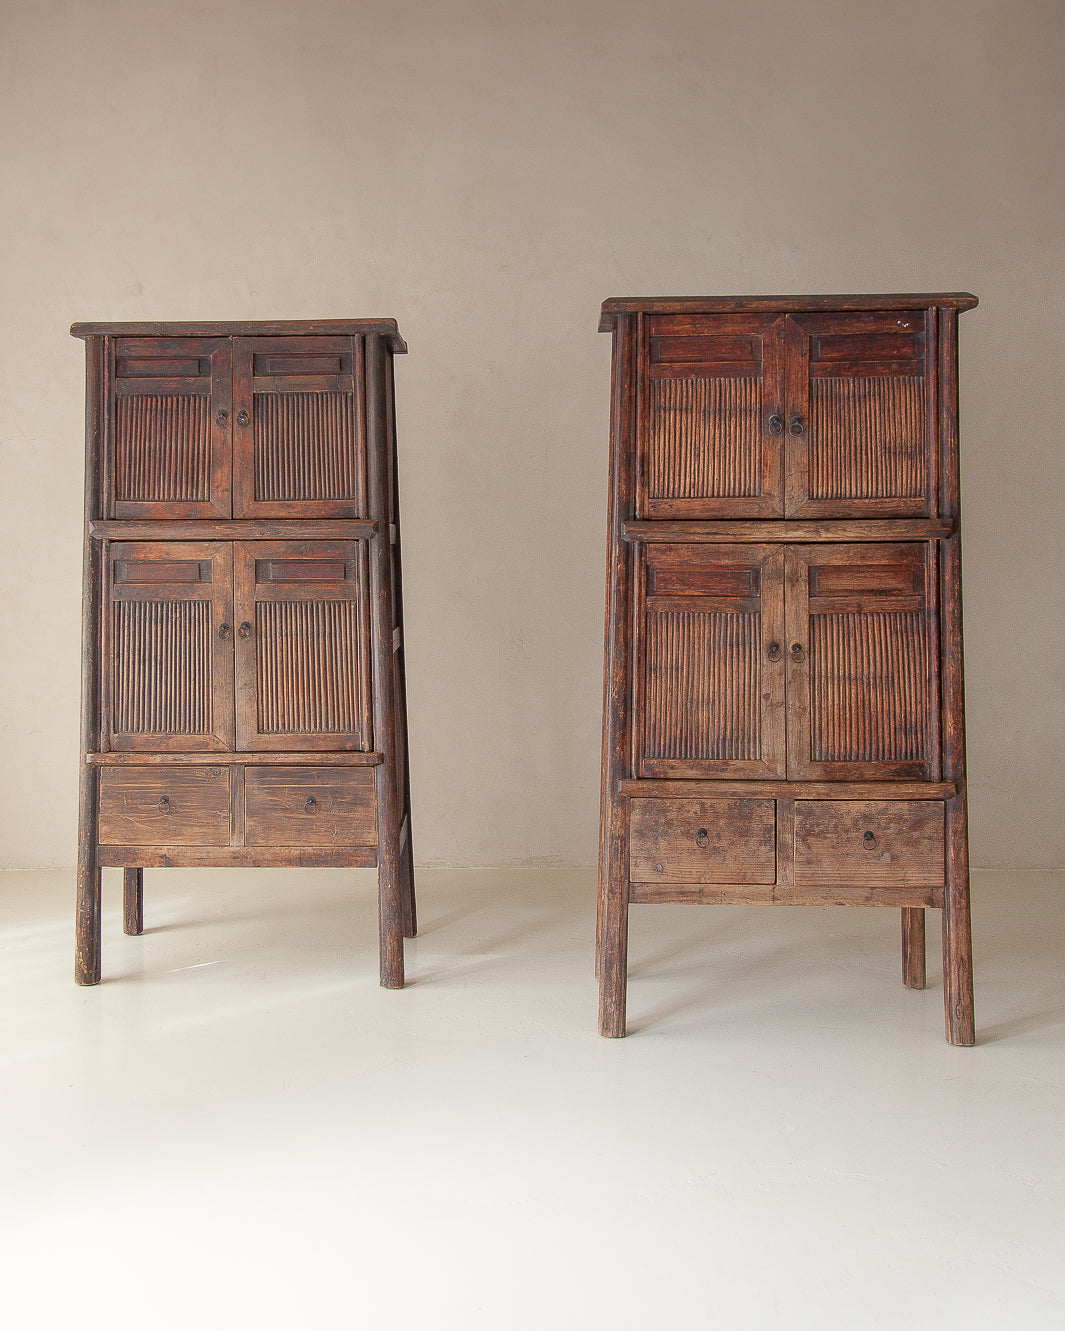 Cabinet Chinois 19th century